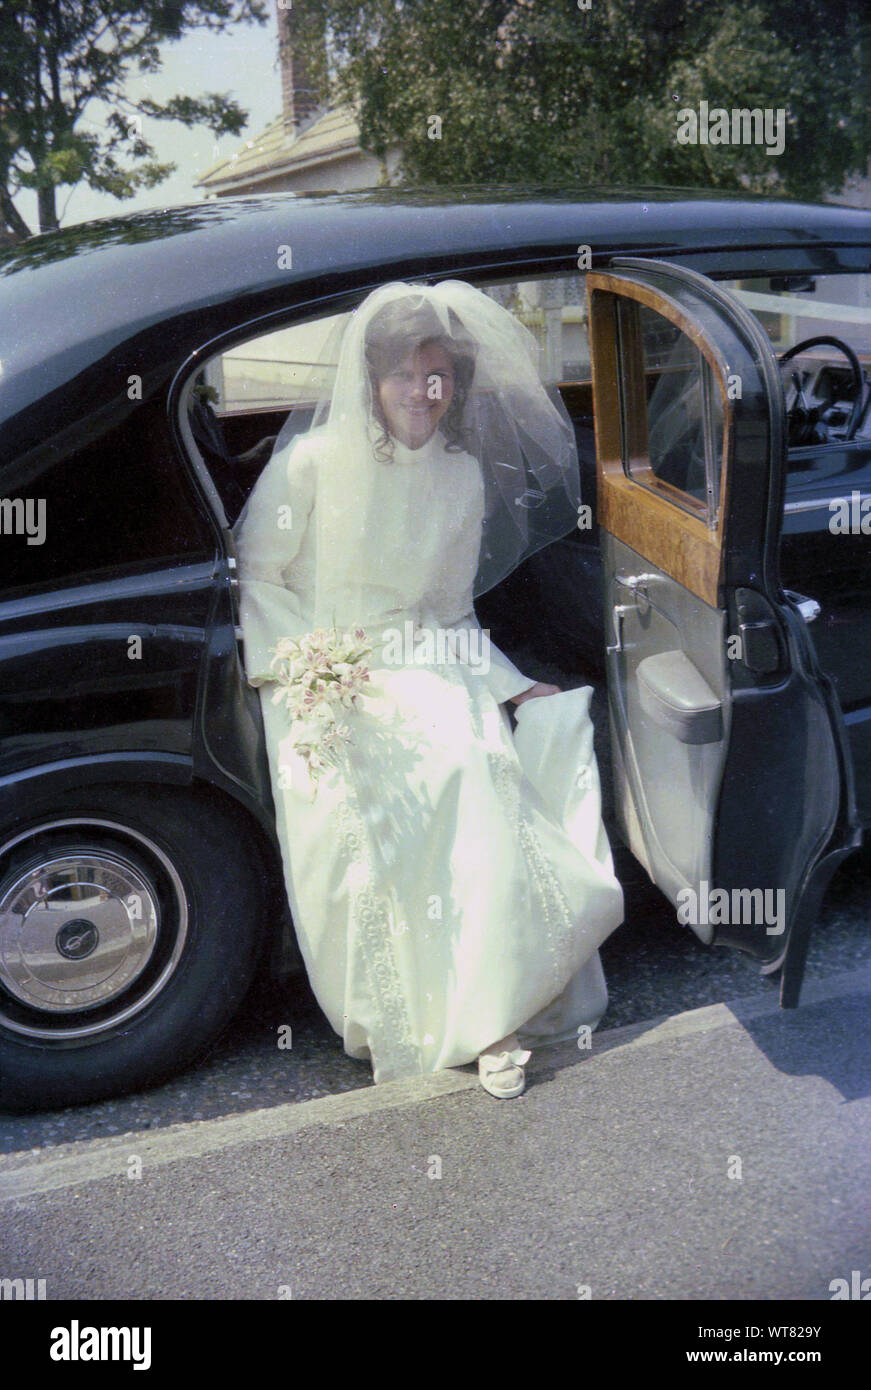 1970s, historical, a bride in her wedding dress and veil getting out of the rear of wooden panelled bridal car, England UK. Stock Photo